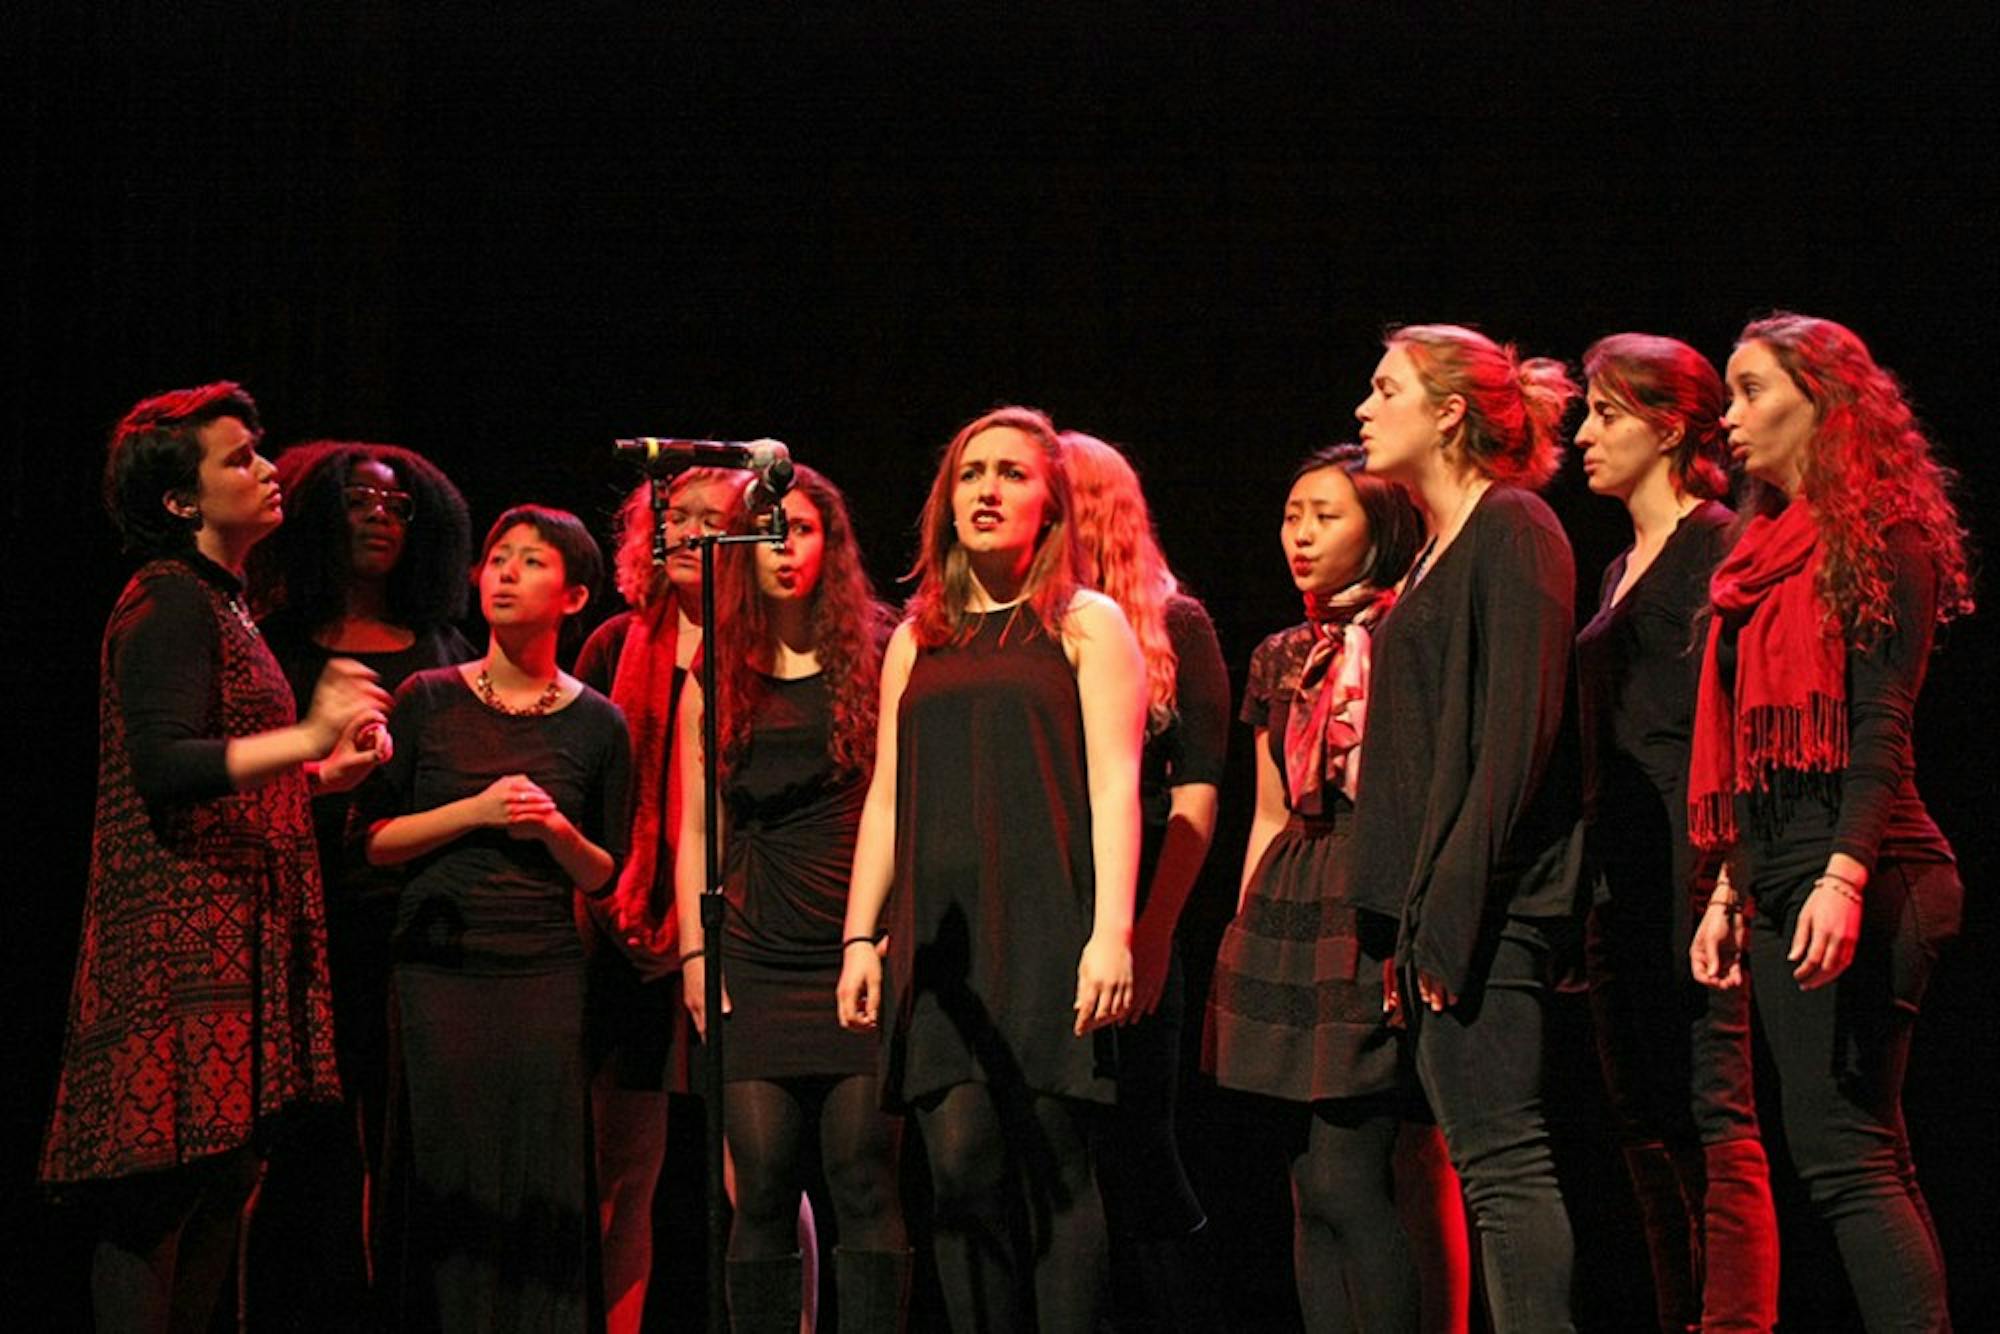 The Rockapellas, an all-women a cappella group, perform at V-February in 2016.